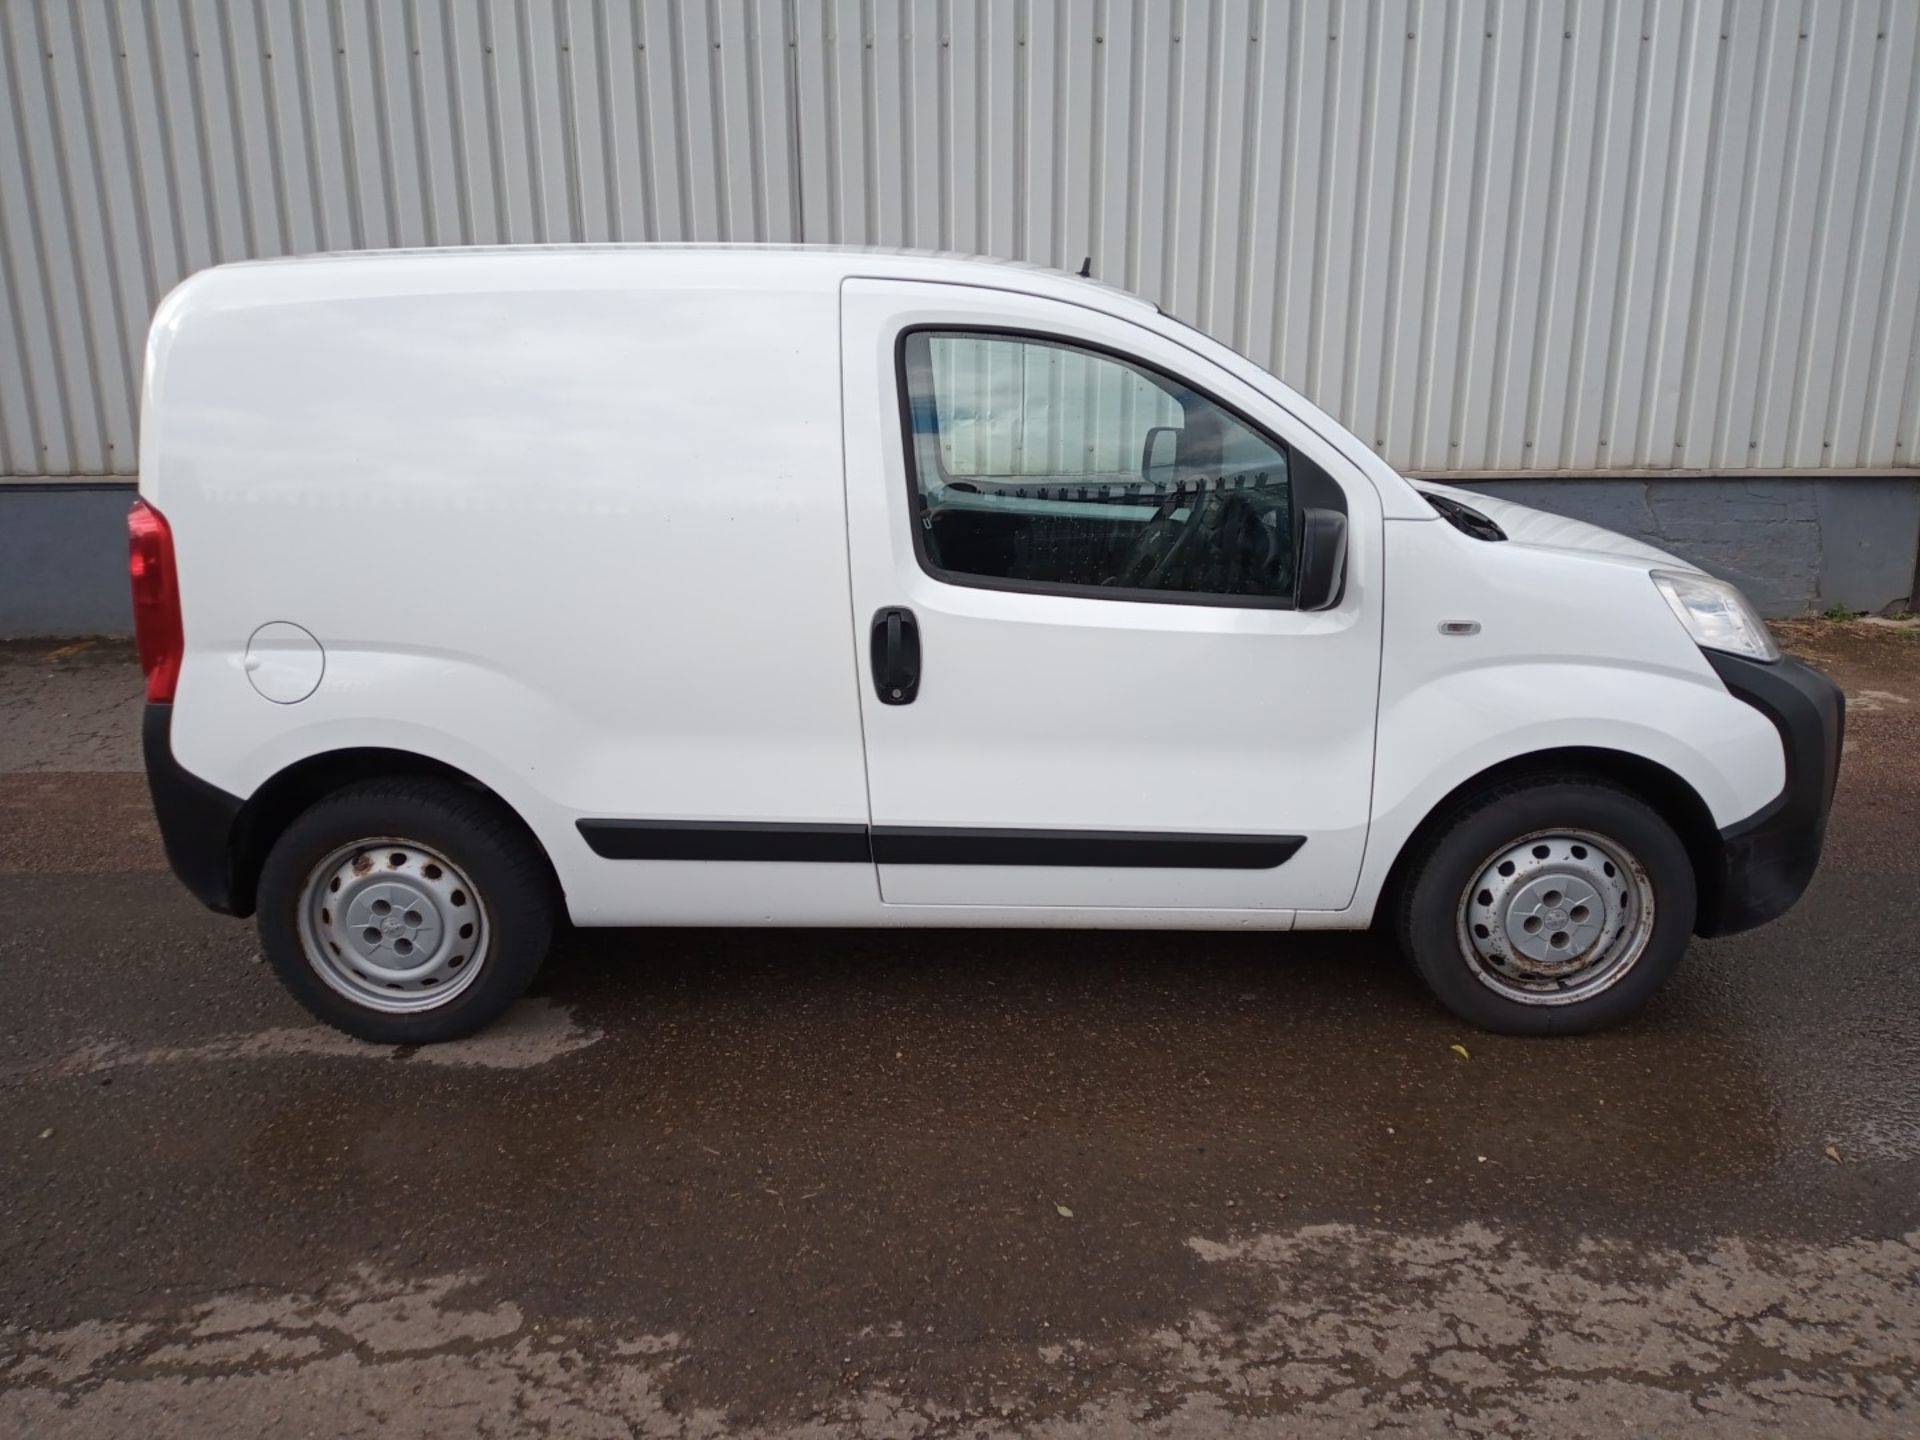 2015 Peugeot Bipper S Hdi White Panel - CL505 - Ref: VVS031 - Location: Corby, Northamptonshire - Image 4 of 25